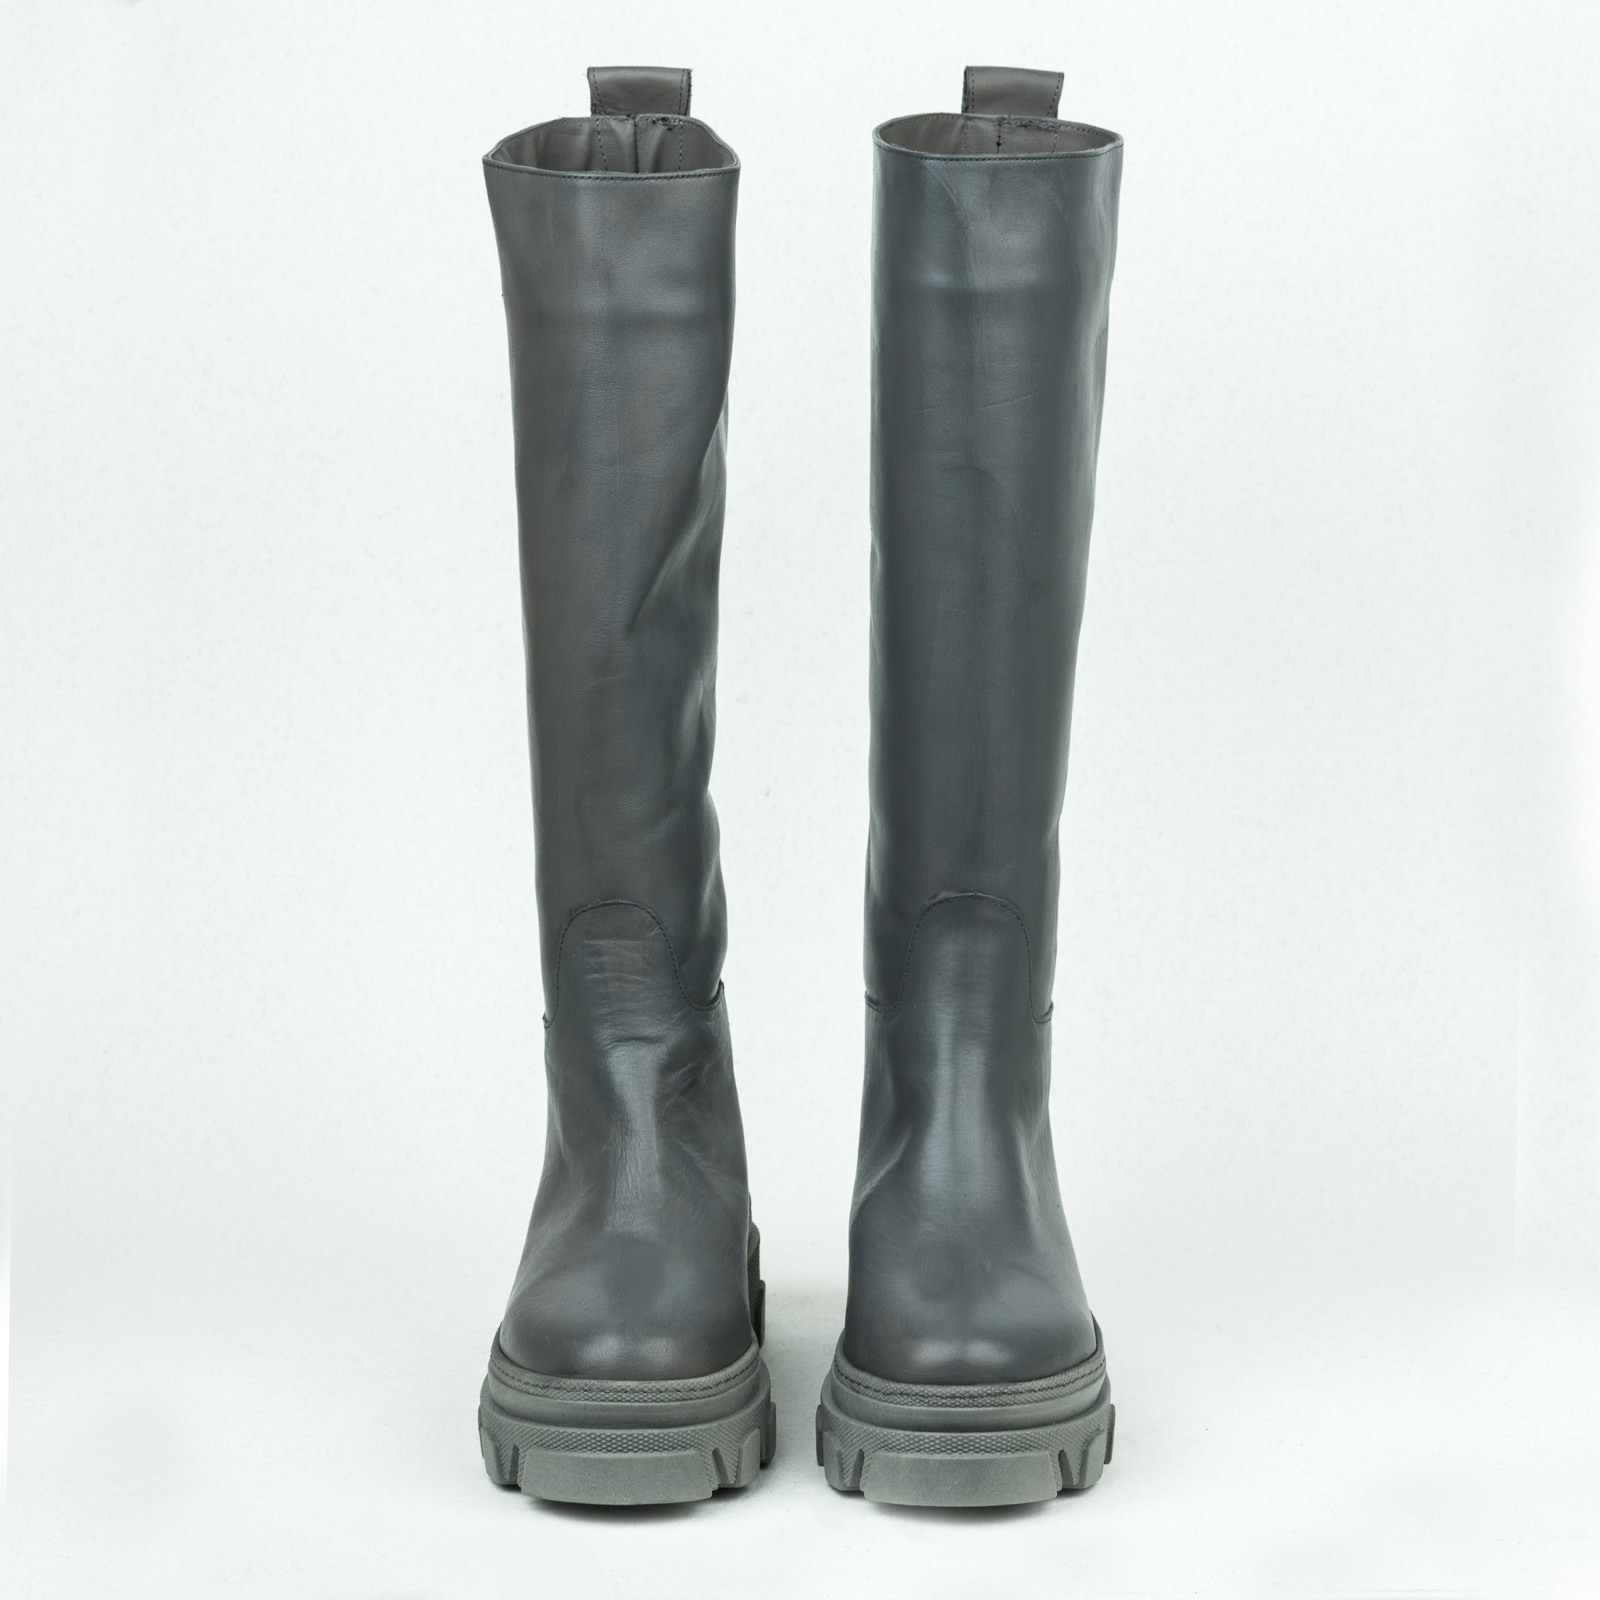 Leather WATERPROOF boots B128 - GREY